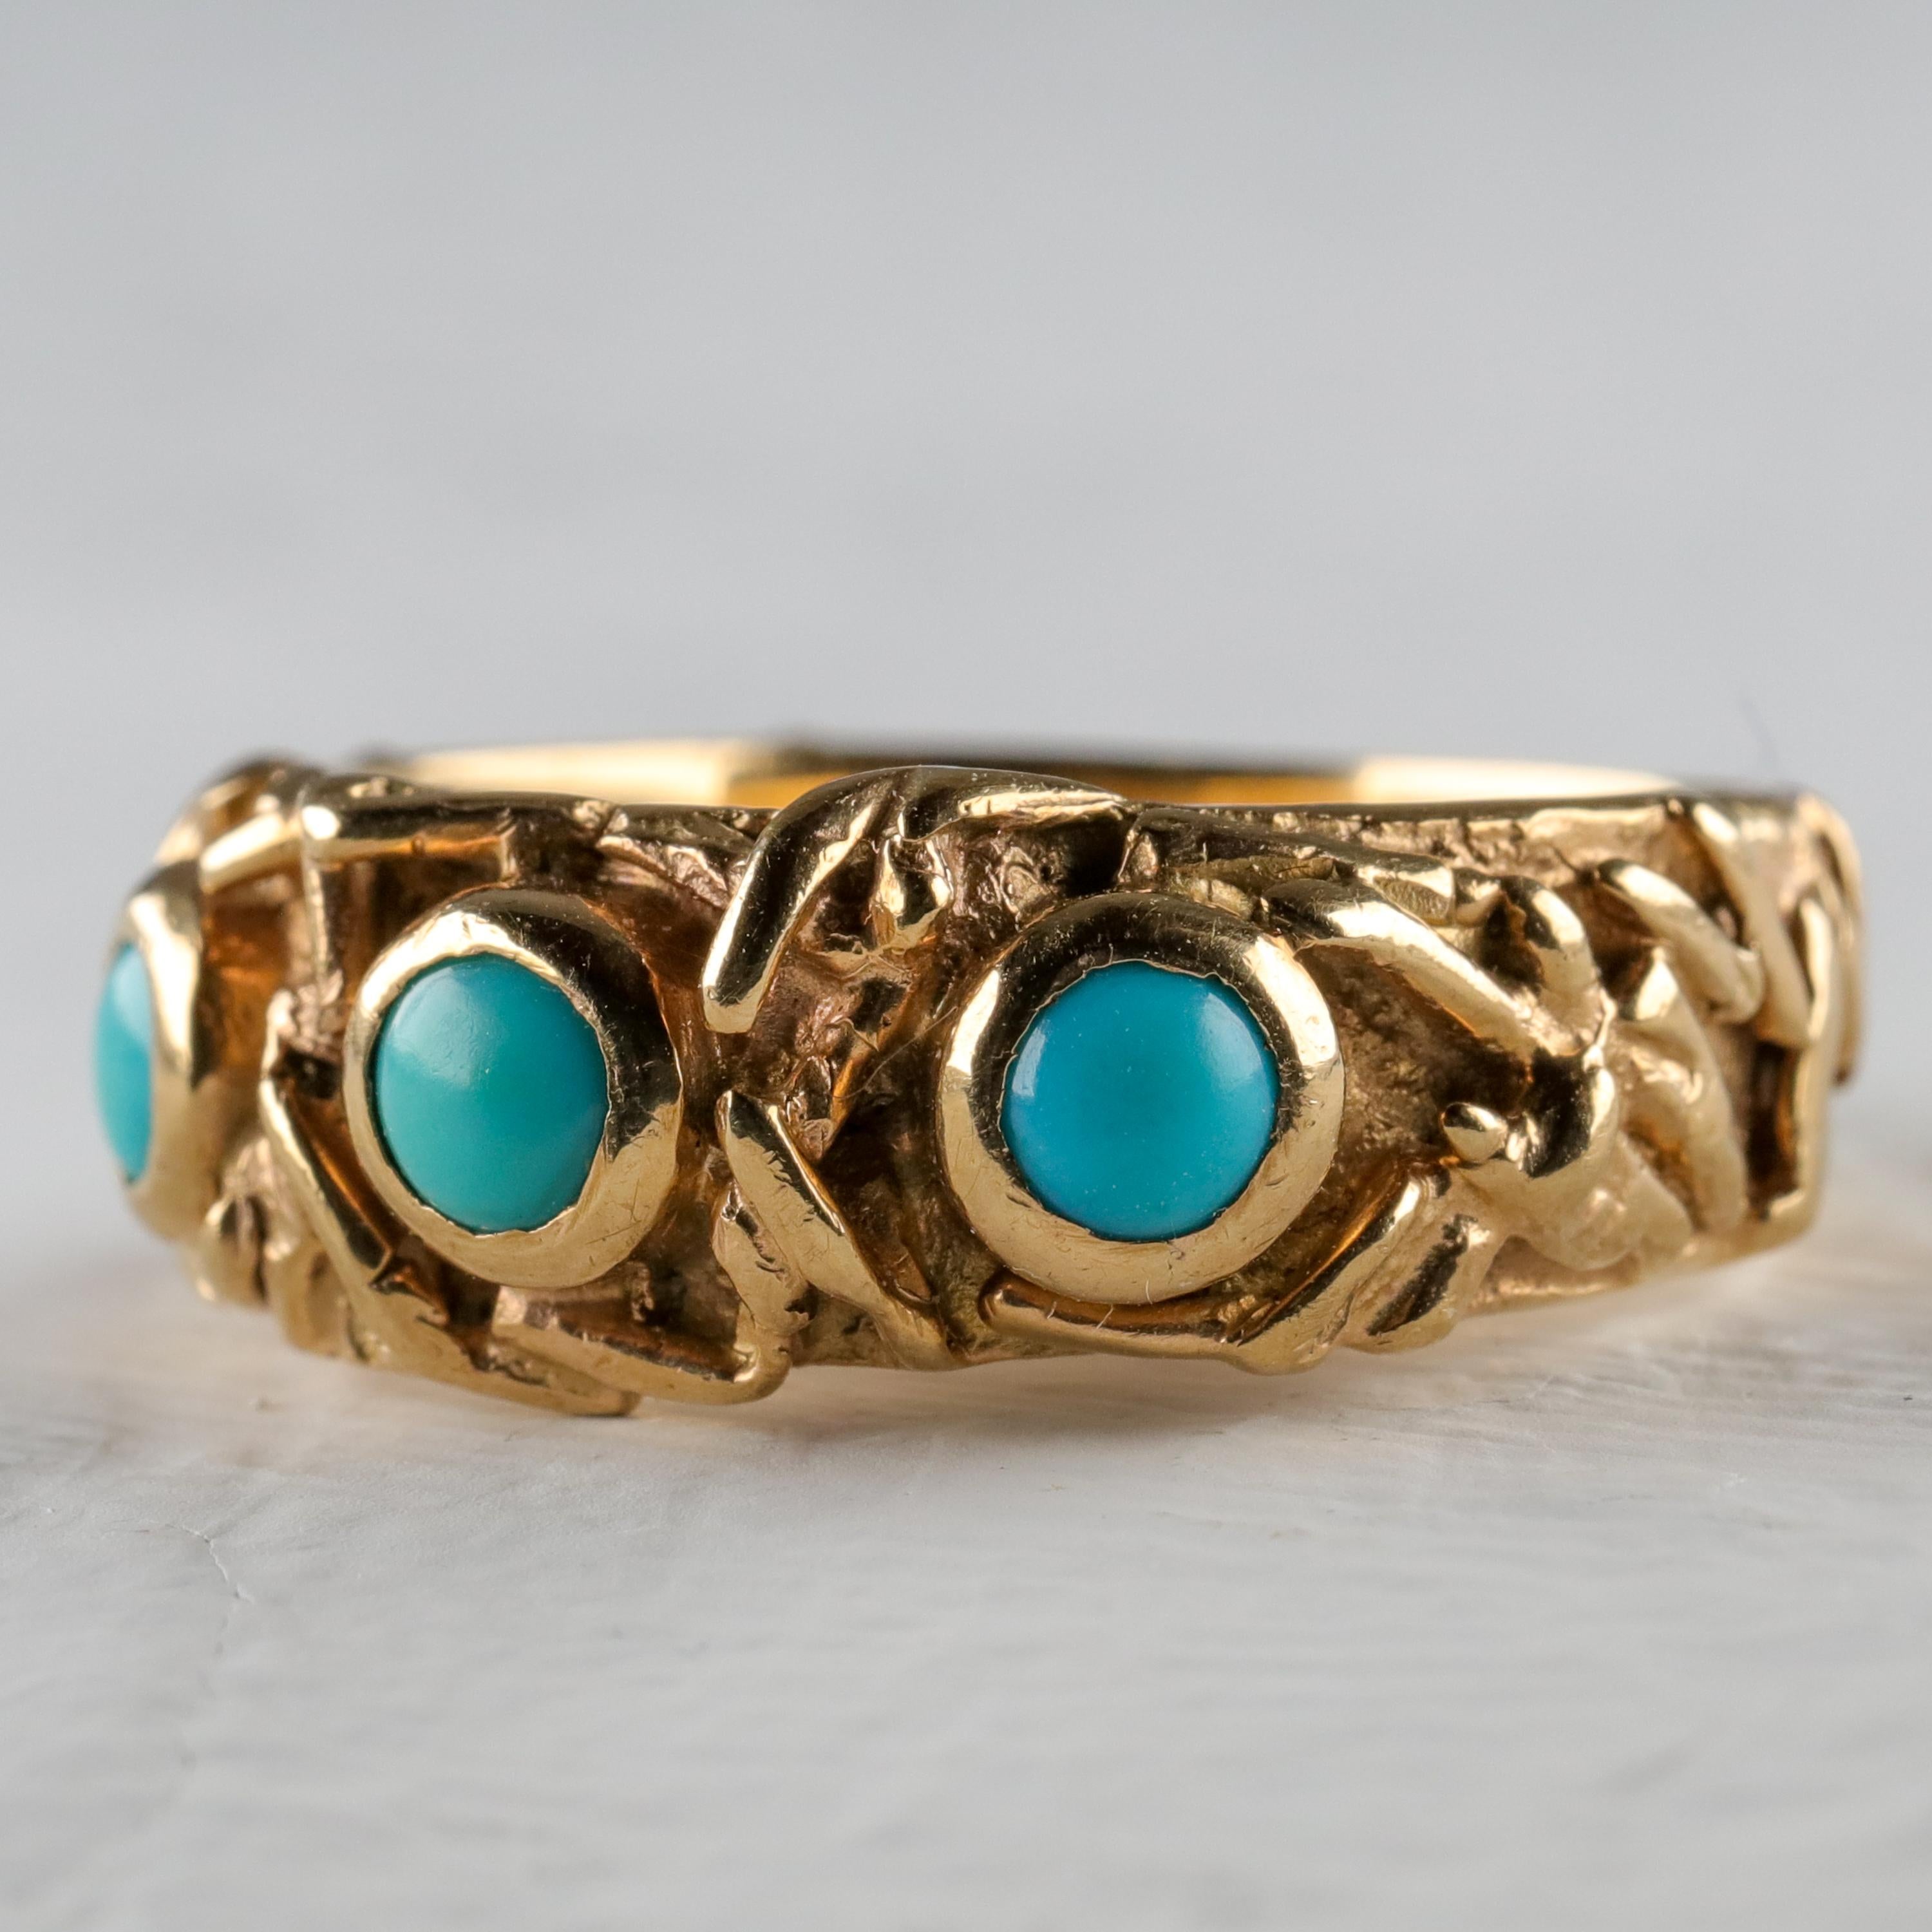 An exquisite, artistic heavy 18K solid buttery yellow gold band is bezel-set with three pristine natural Persian turquoise gems in this one-of-a-kind hand-crafted ring with a definitely Art Nouveau vibe that dates from the 1960s. Fully hallmarked on